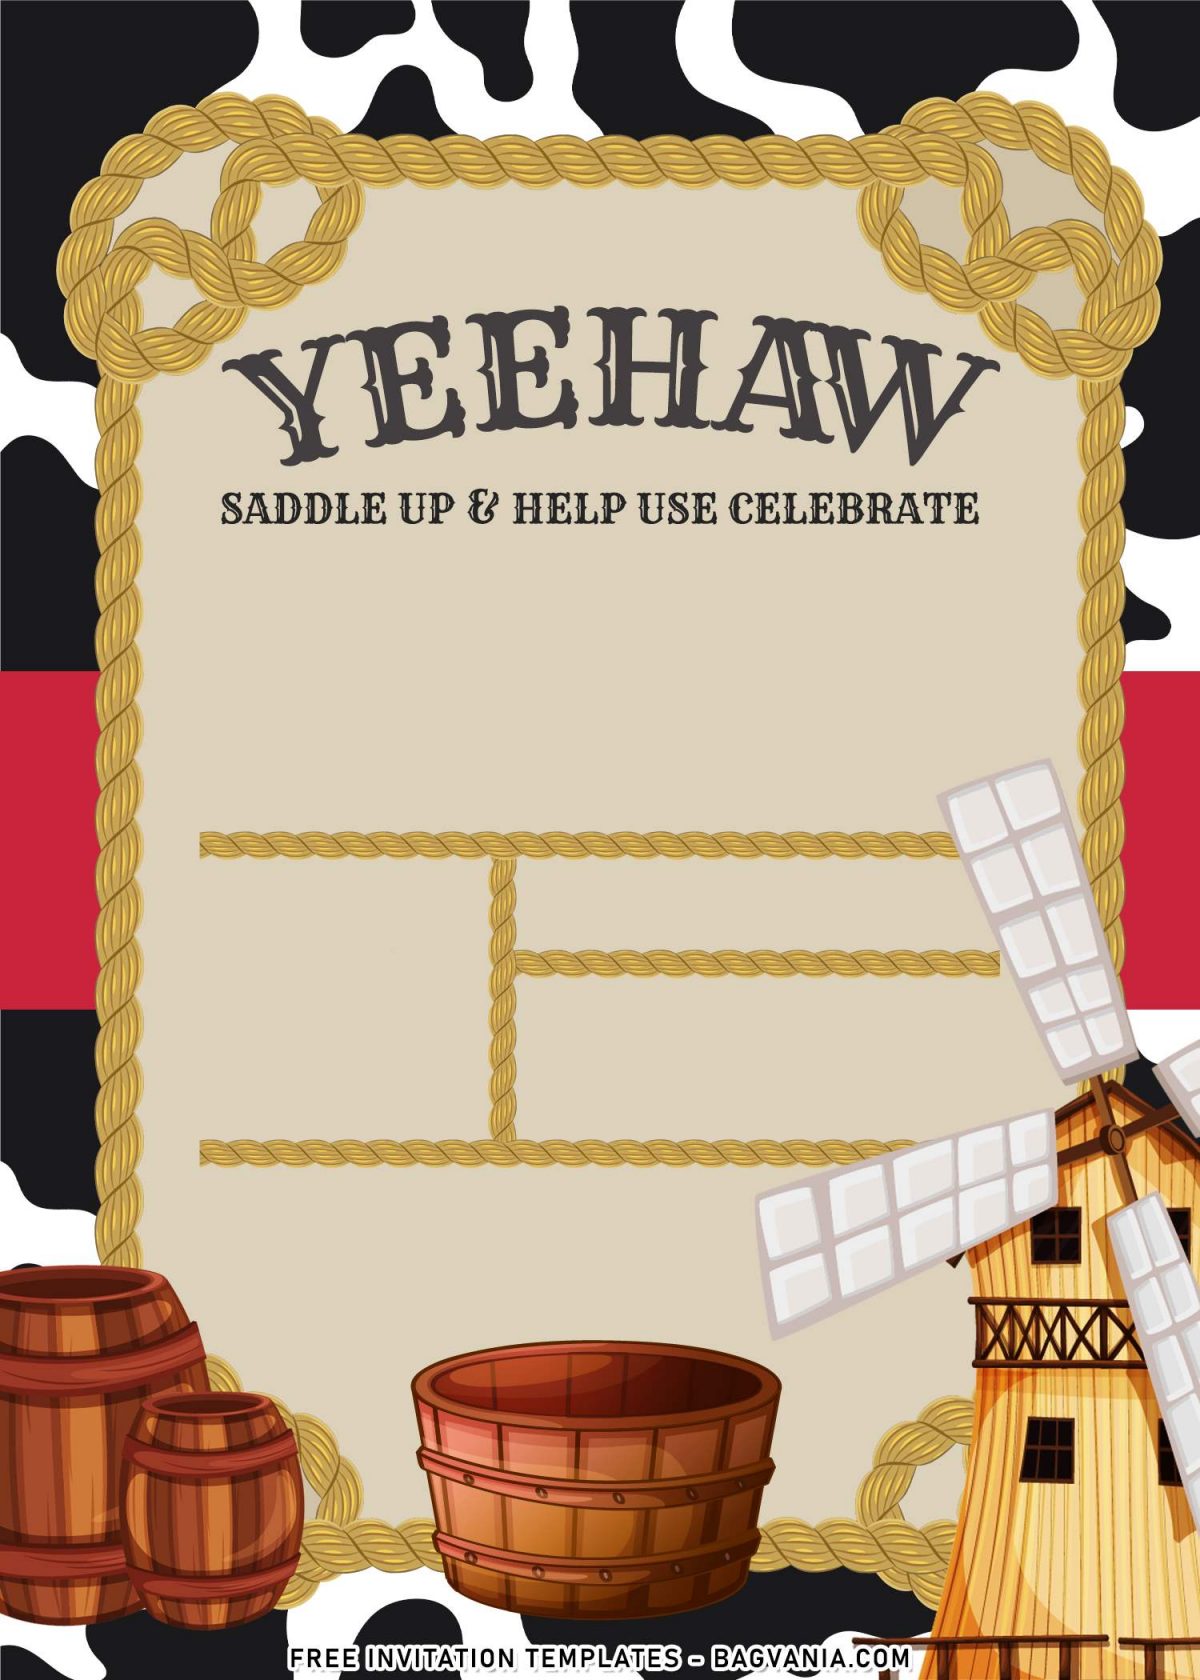 7+ Western Cowboy Birthday Invitation Templates with windmill and oil barrel